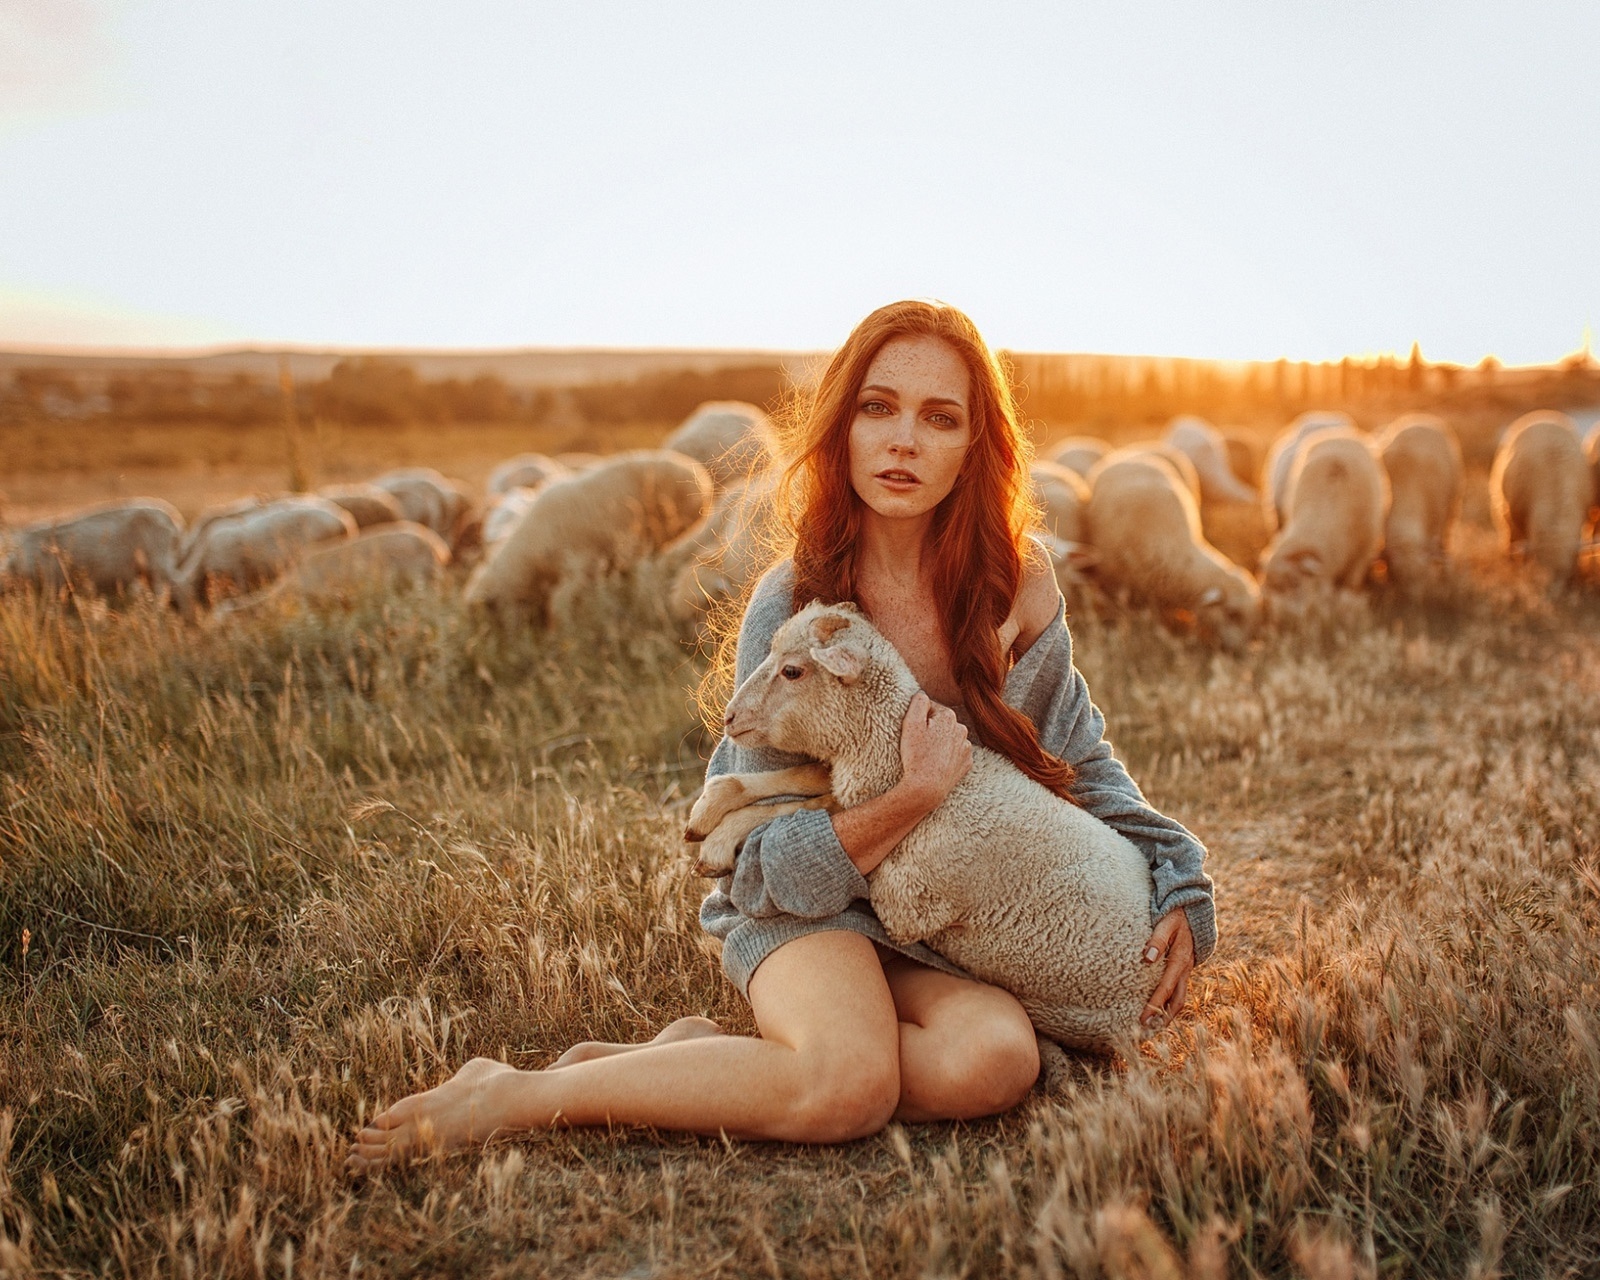 Girl with Sheep wallpaper 1600x1280